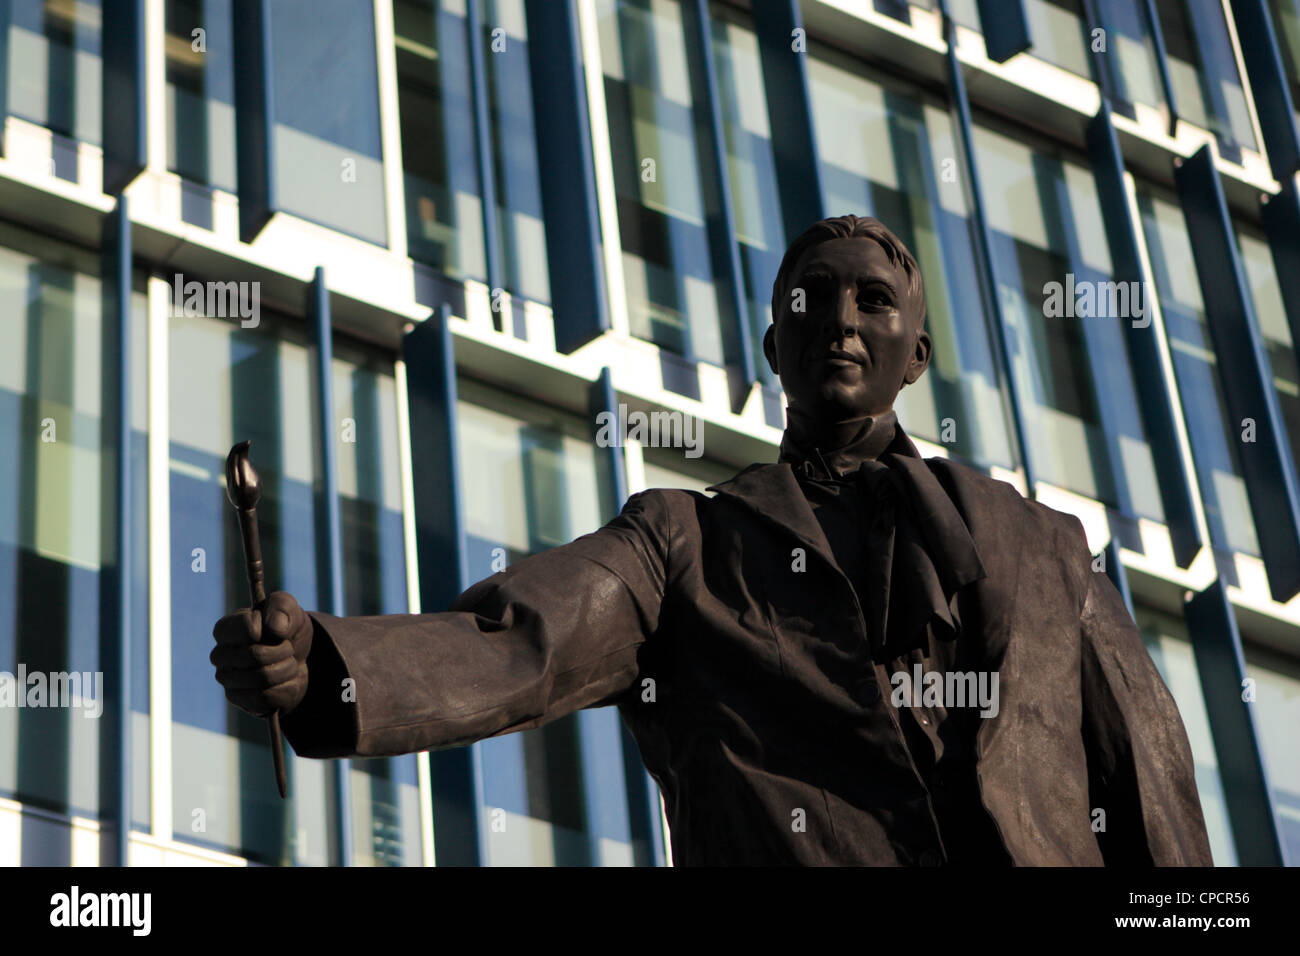 Monument to the Unknown Artist by Greyworld, Sumner Street, Southwark, London, England, UK. Stock Photo